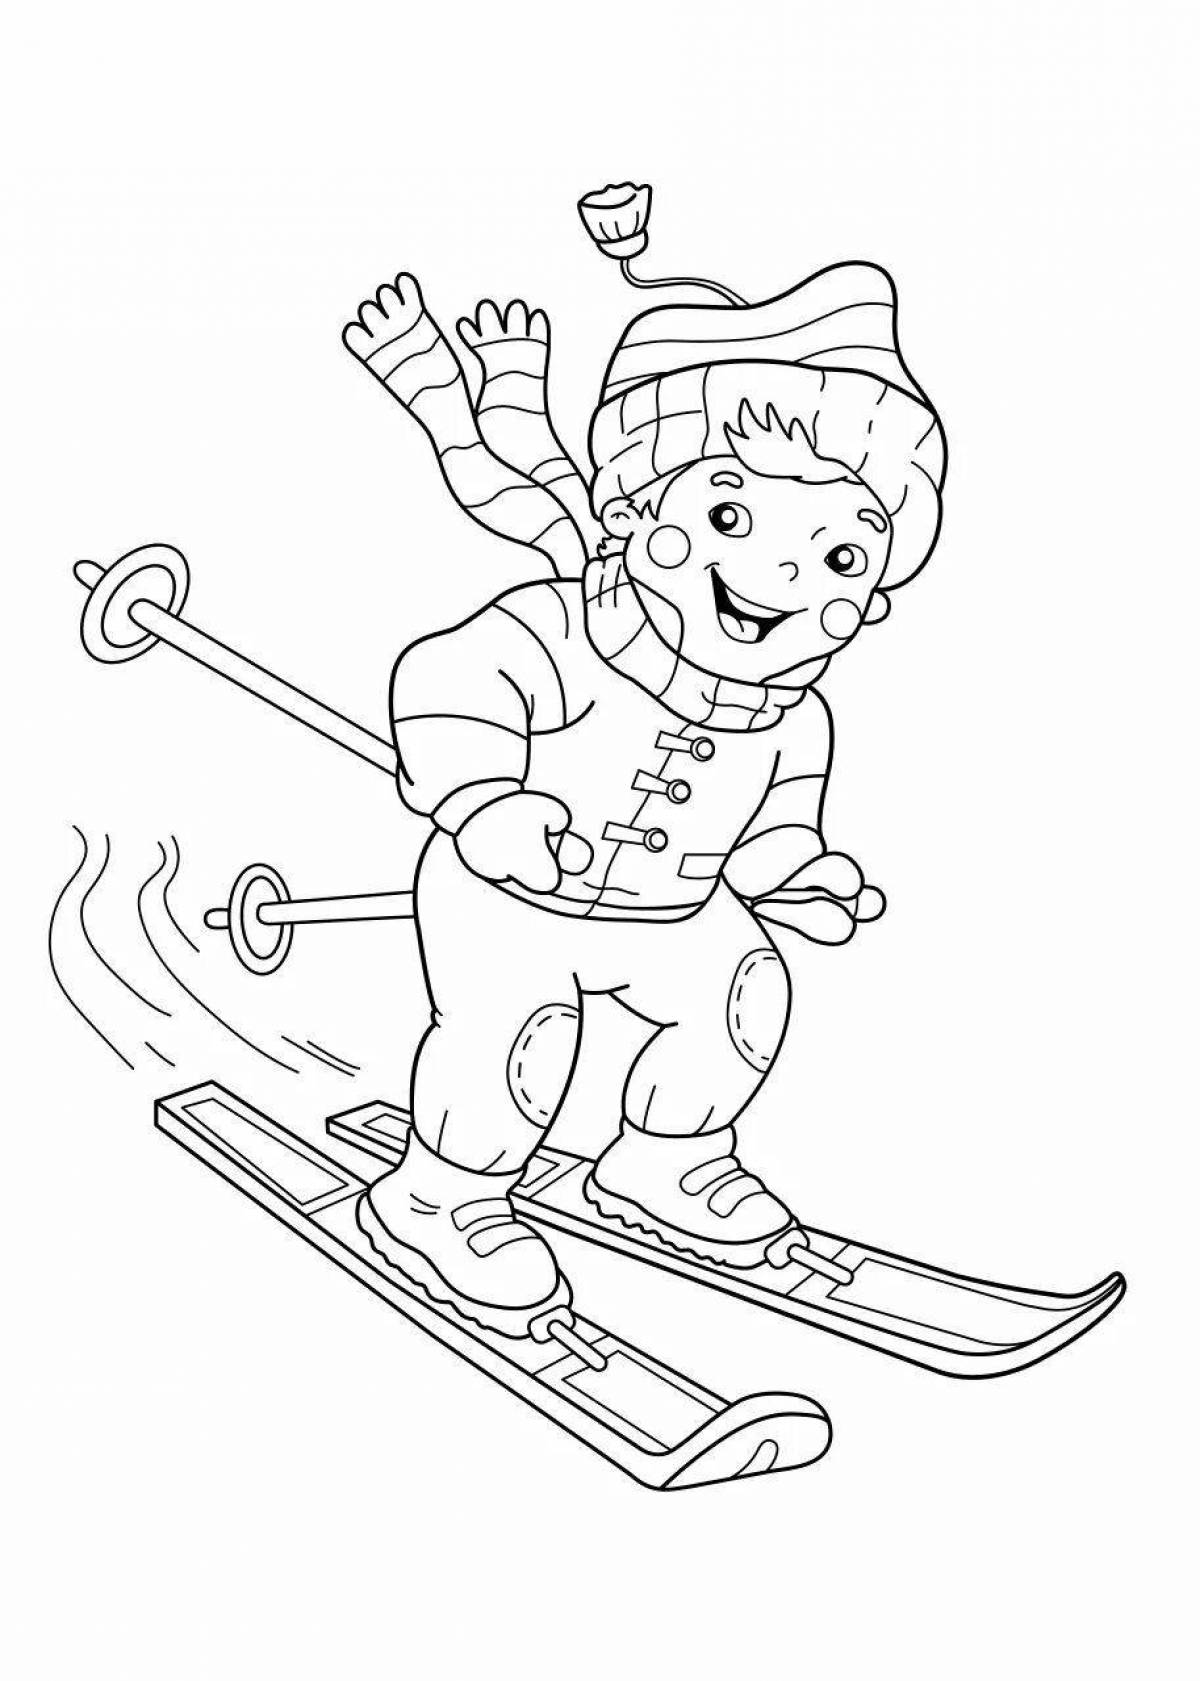 Coloring page merry boy skiing